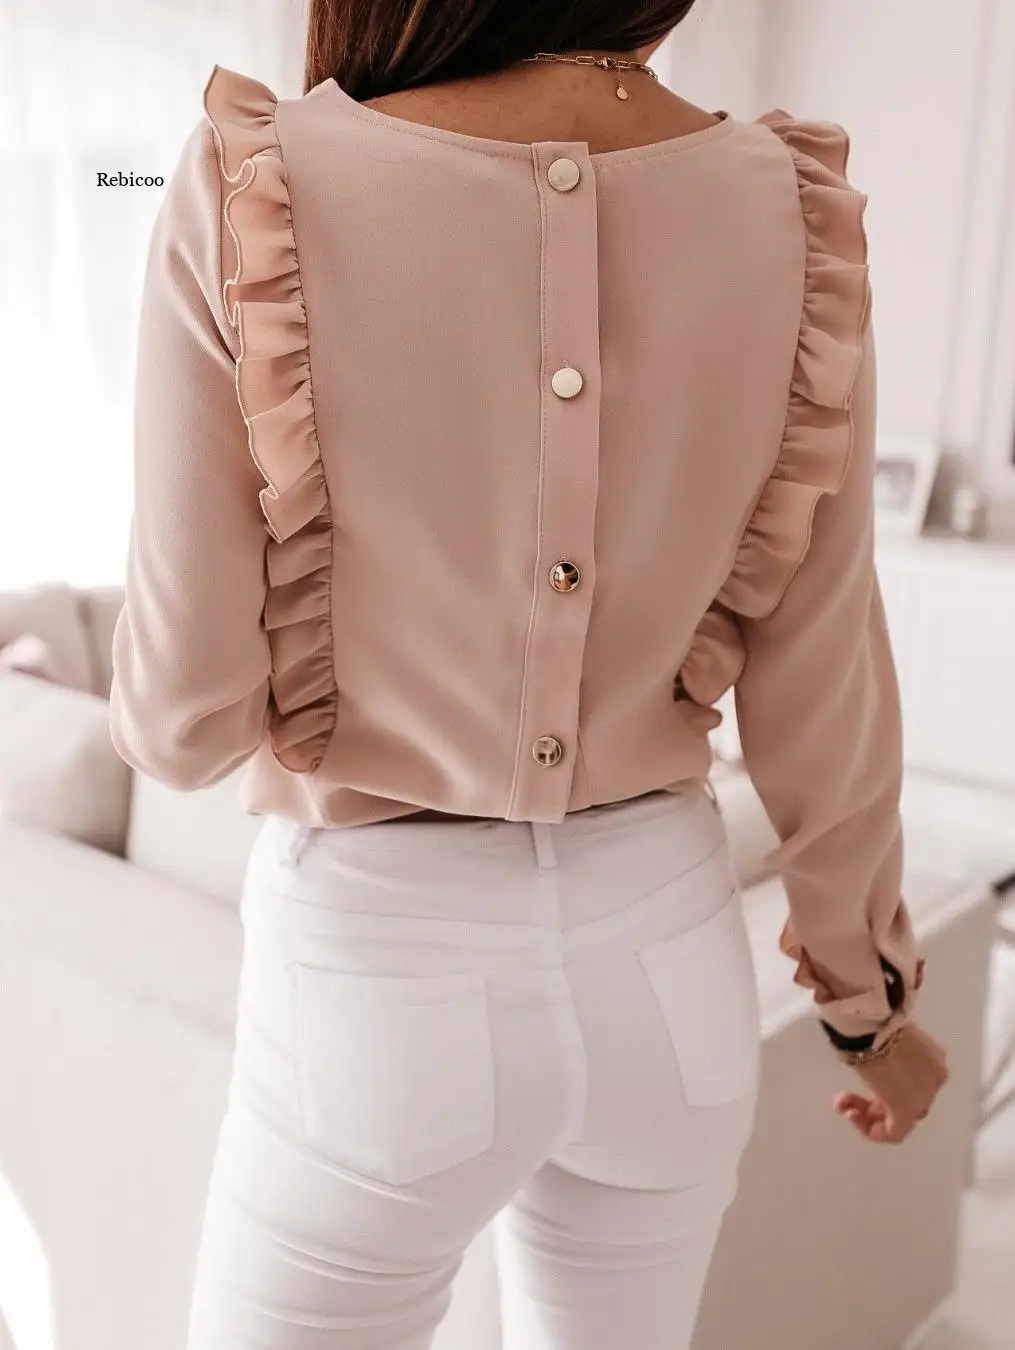 

Spring Autumn Lady Shirts O Neck Ruffle Blouse Elegant Office Back Metal Buttons Blouses Casual Long Sleeve Women Blusa Tops